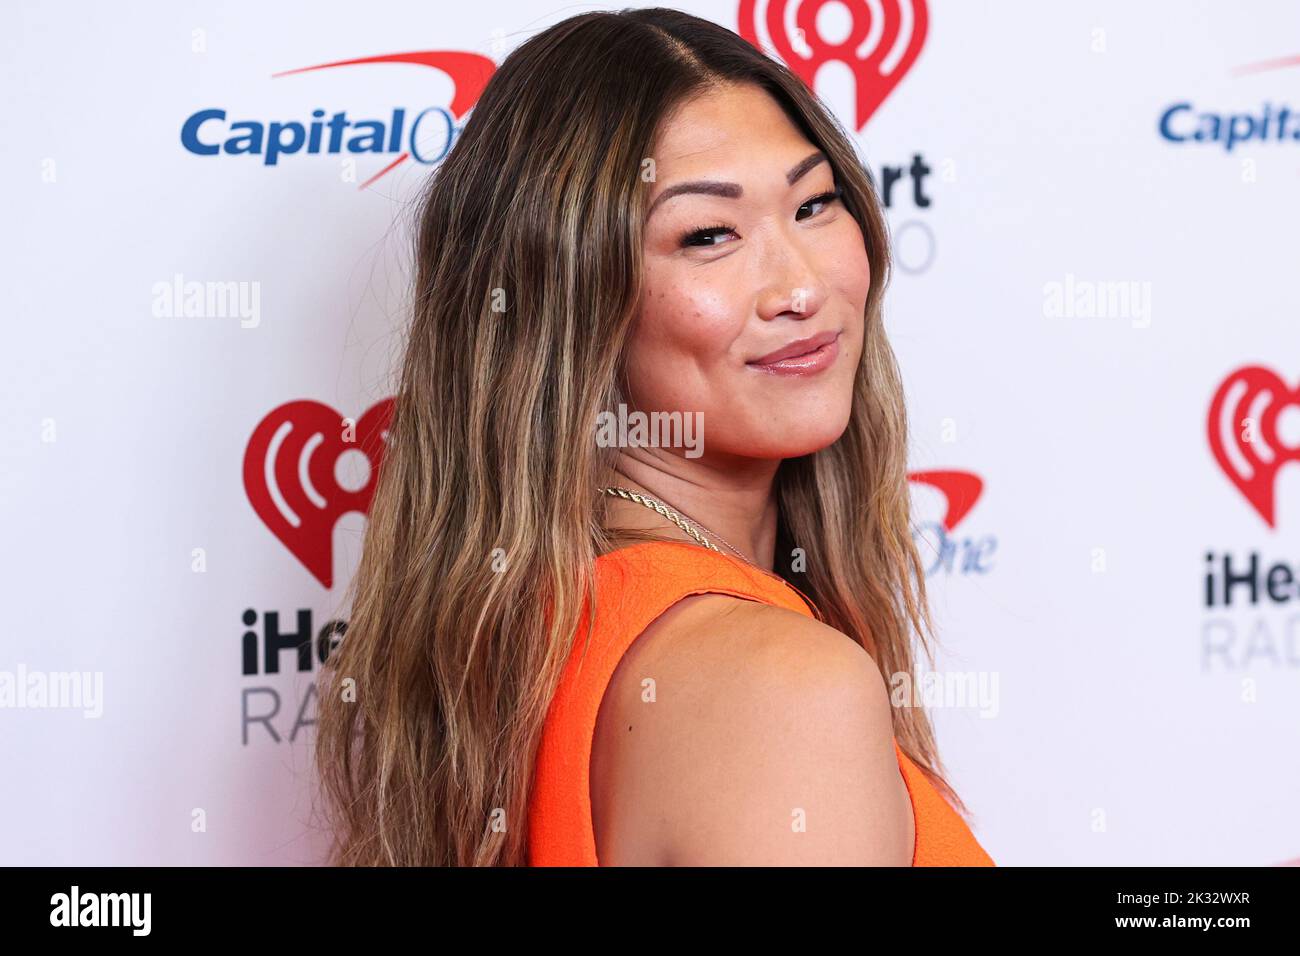 LAS VEGAS, NEVADA, USA - SEPTEMBER 23: Jenna Ushkowitz poses in the press room at the 2022 iHeartRadio Music Festival - Night 1 held at the T-Mobile Arena on September 23, 2022 in Las Vegas, Nevada, United States. (Photo by Xavier Collin/Image Press Agency) Stock Photo